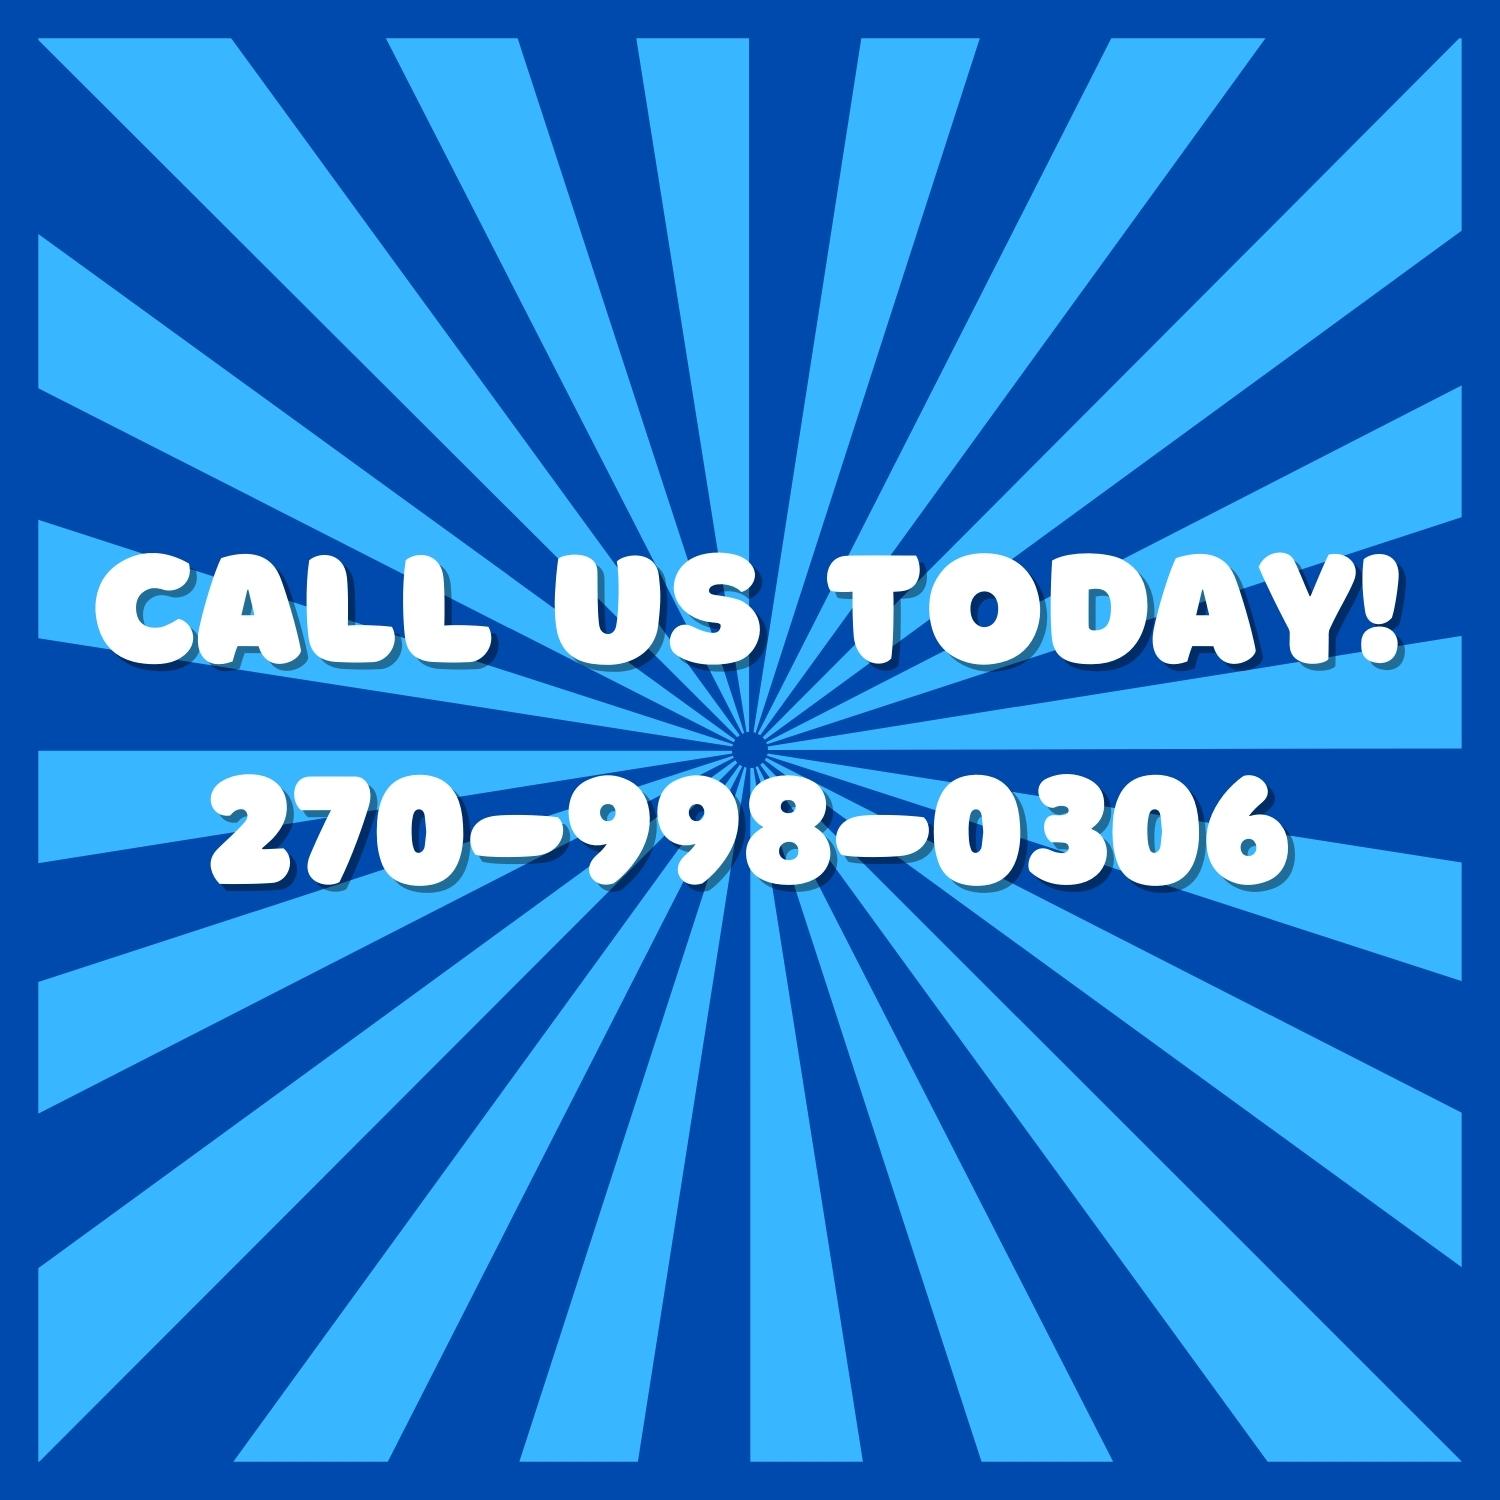 A blue and white graphic with the words " call us today !"